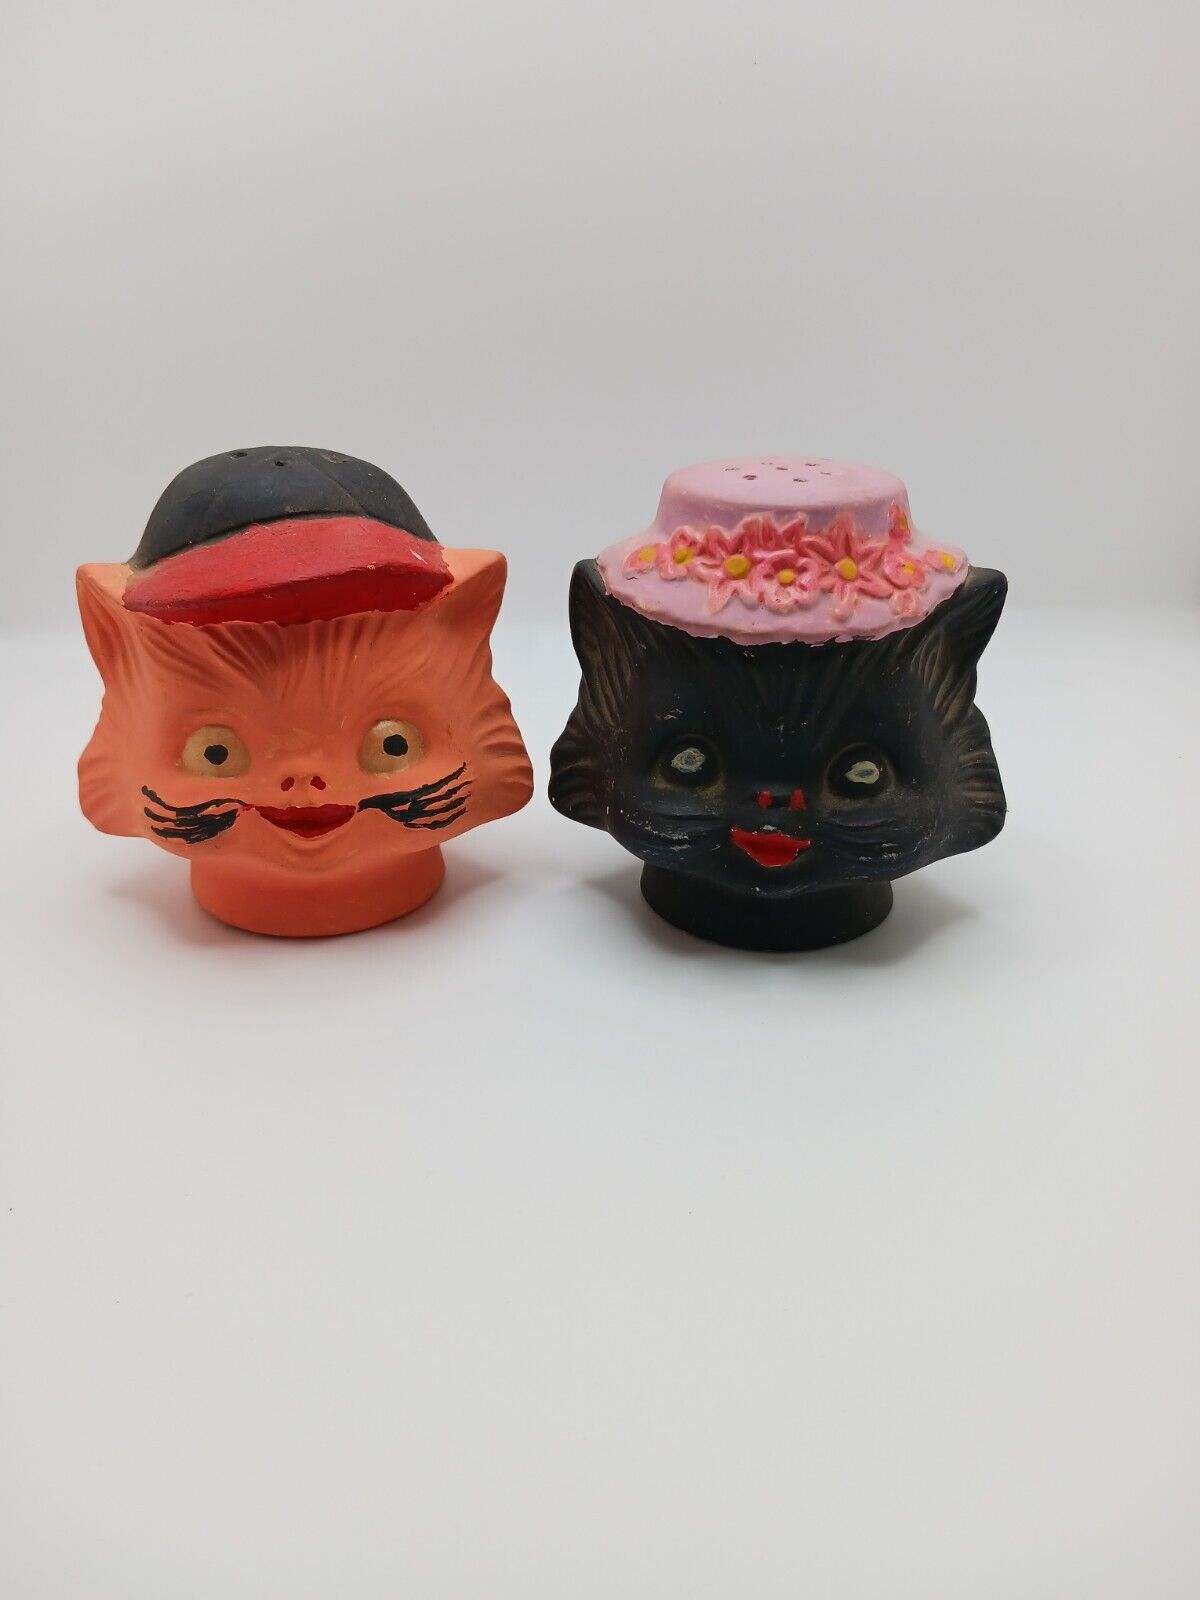 Vintage Anthropomorphic Hand Painted Cat Head Salt & Pepper Shakers Boy and Girl